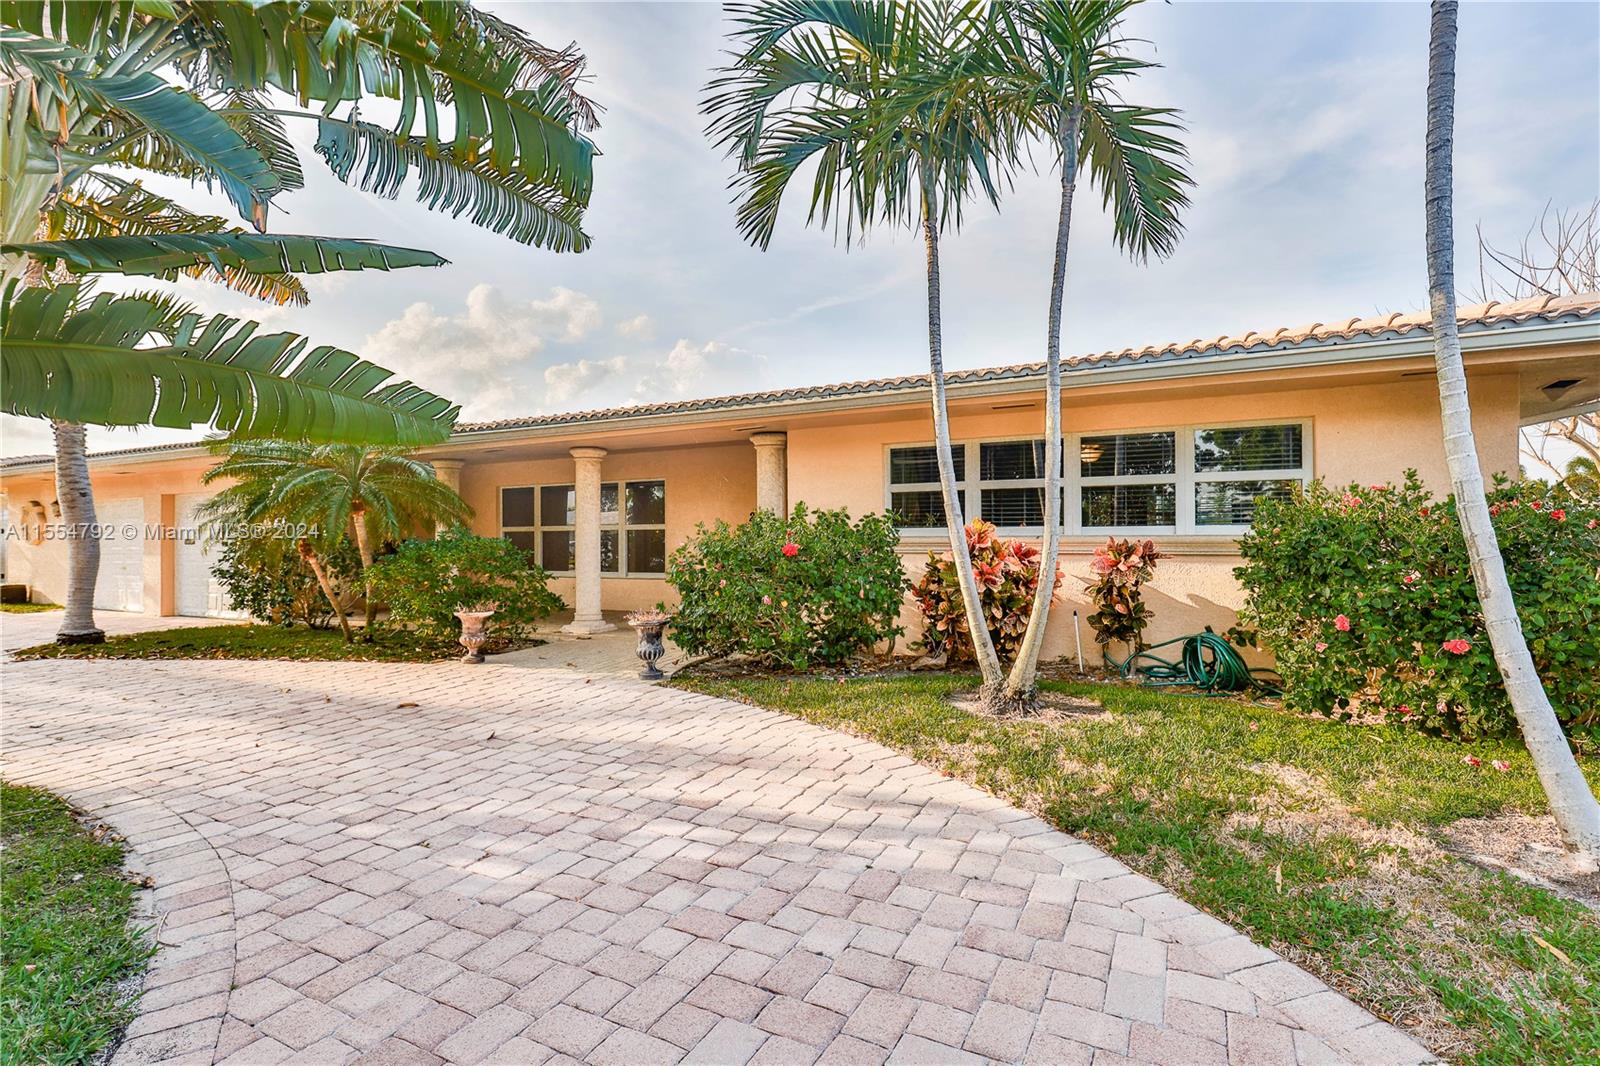 2121 NE 29th St, Lighthouse Point, Florida 33064, 4 Bedrooms Bedrooms, ,3 BathroomsBathrooms,Residential,For Sale,2121 NE 29th St,A11554792